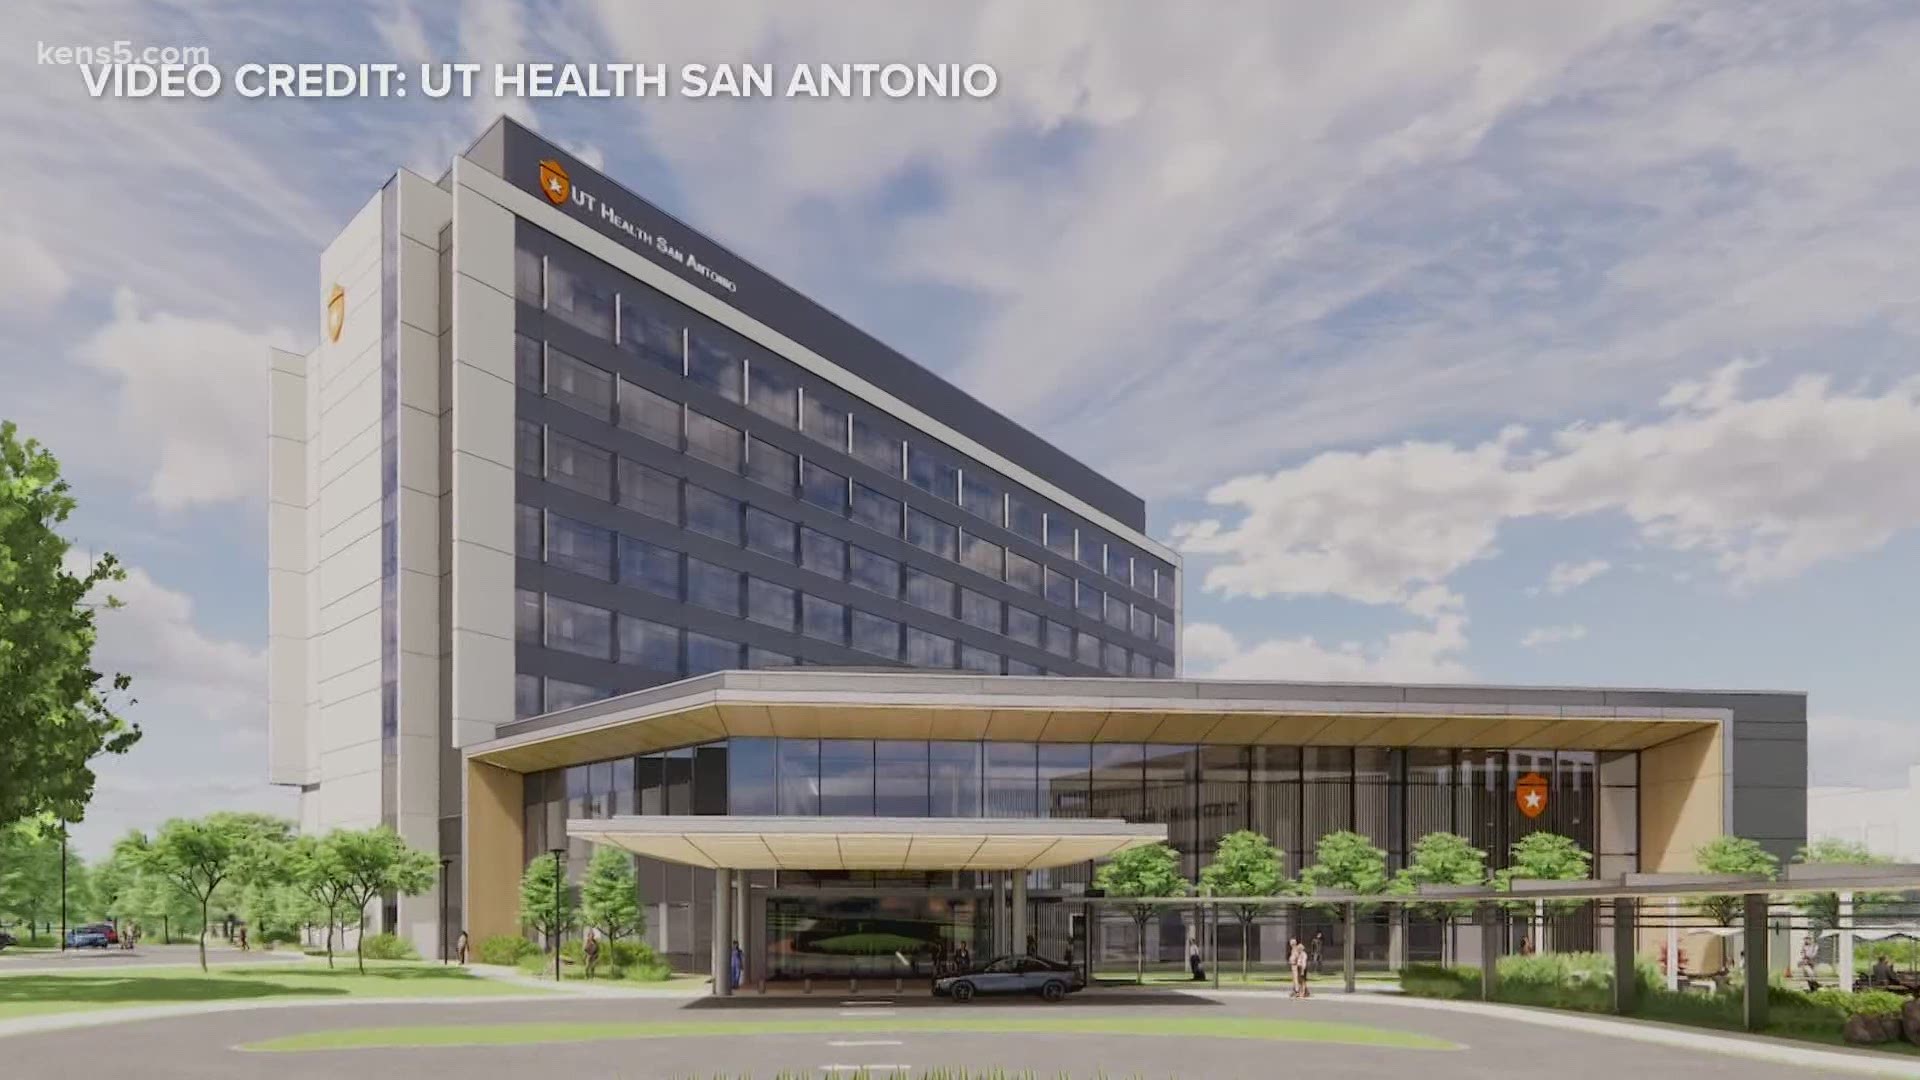 It is expected to be completed by 2024, and should have a huge impact for cancer patients here in the Alamo City and Bexar County.